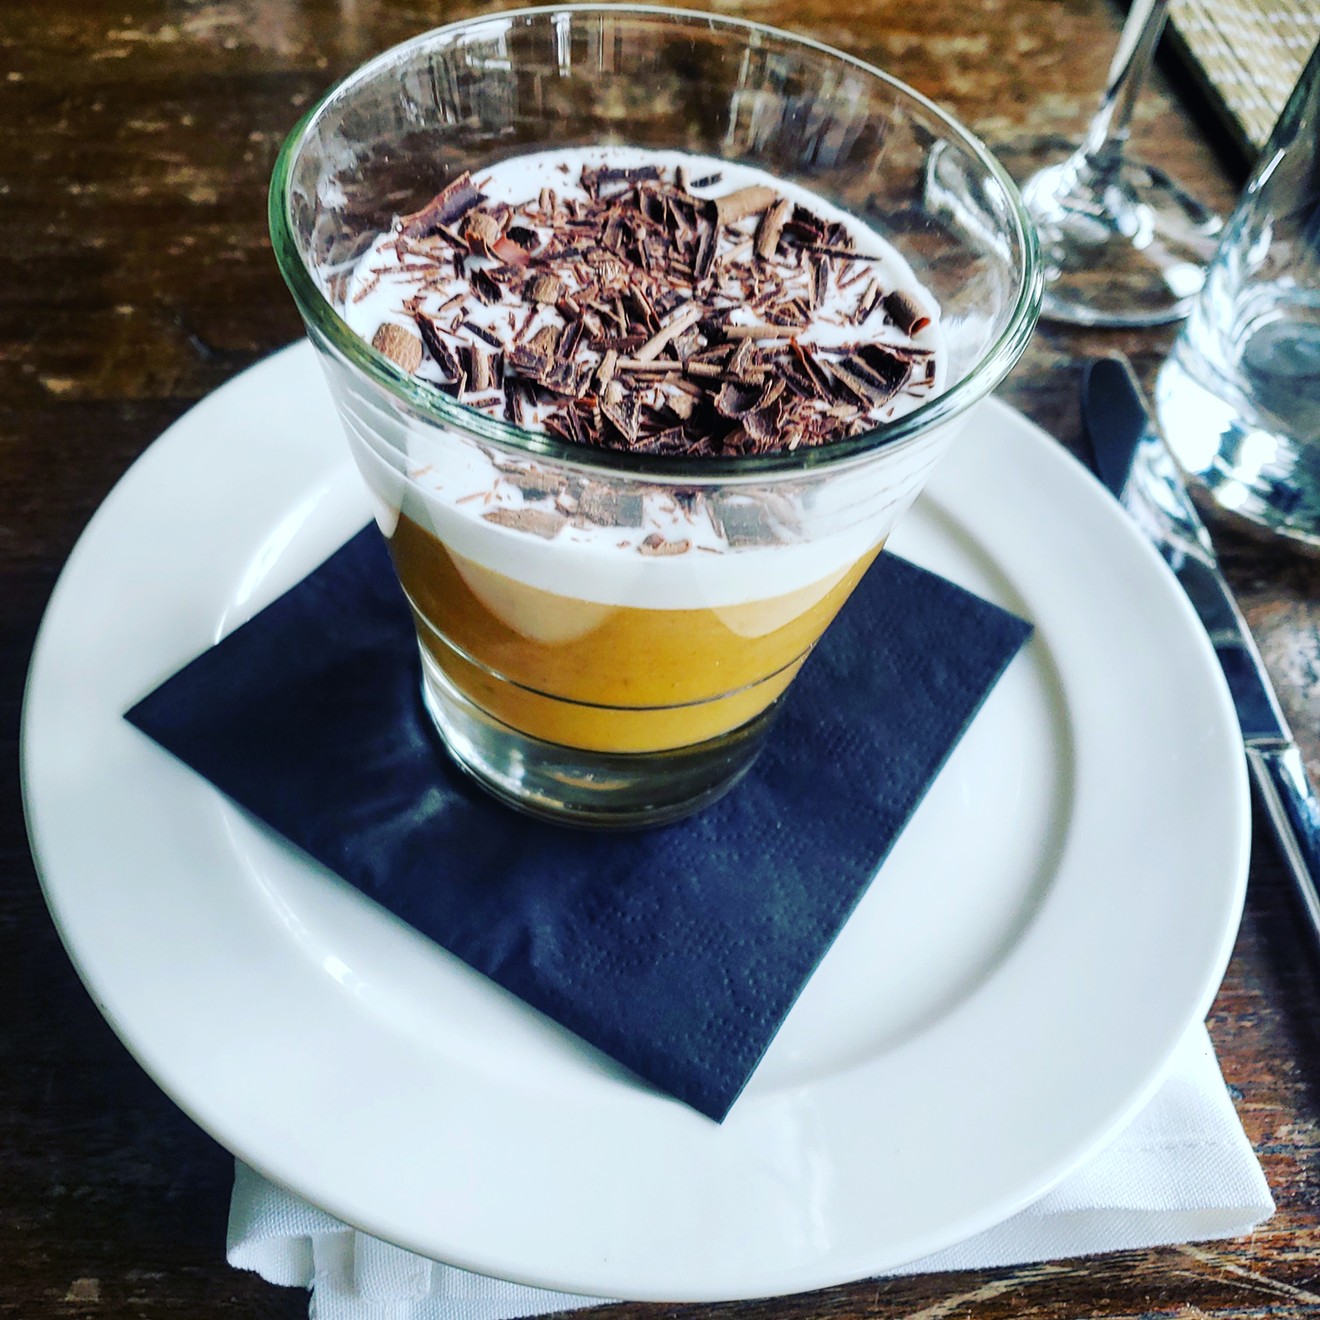 The vegan pudding at Coohills is made with sweet-potato purée instead of the standard eggs and dairy.